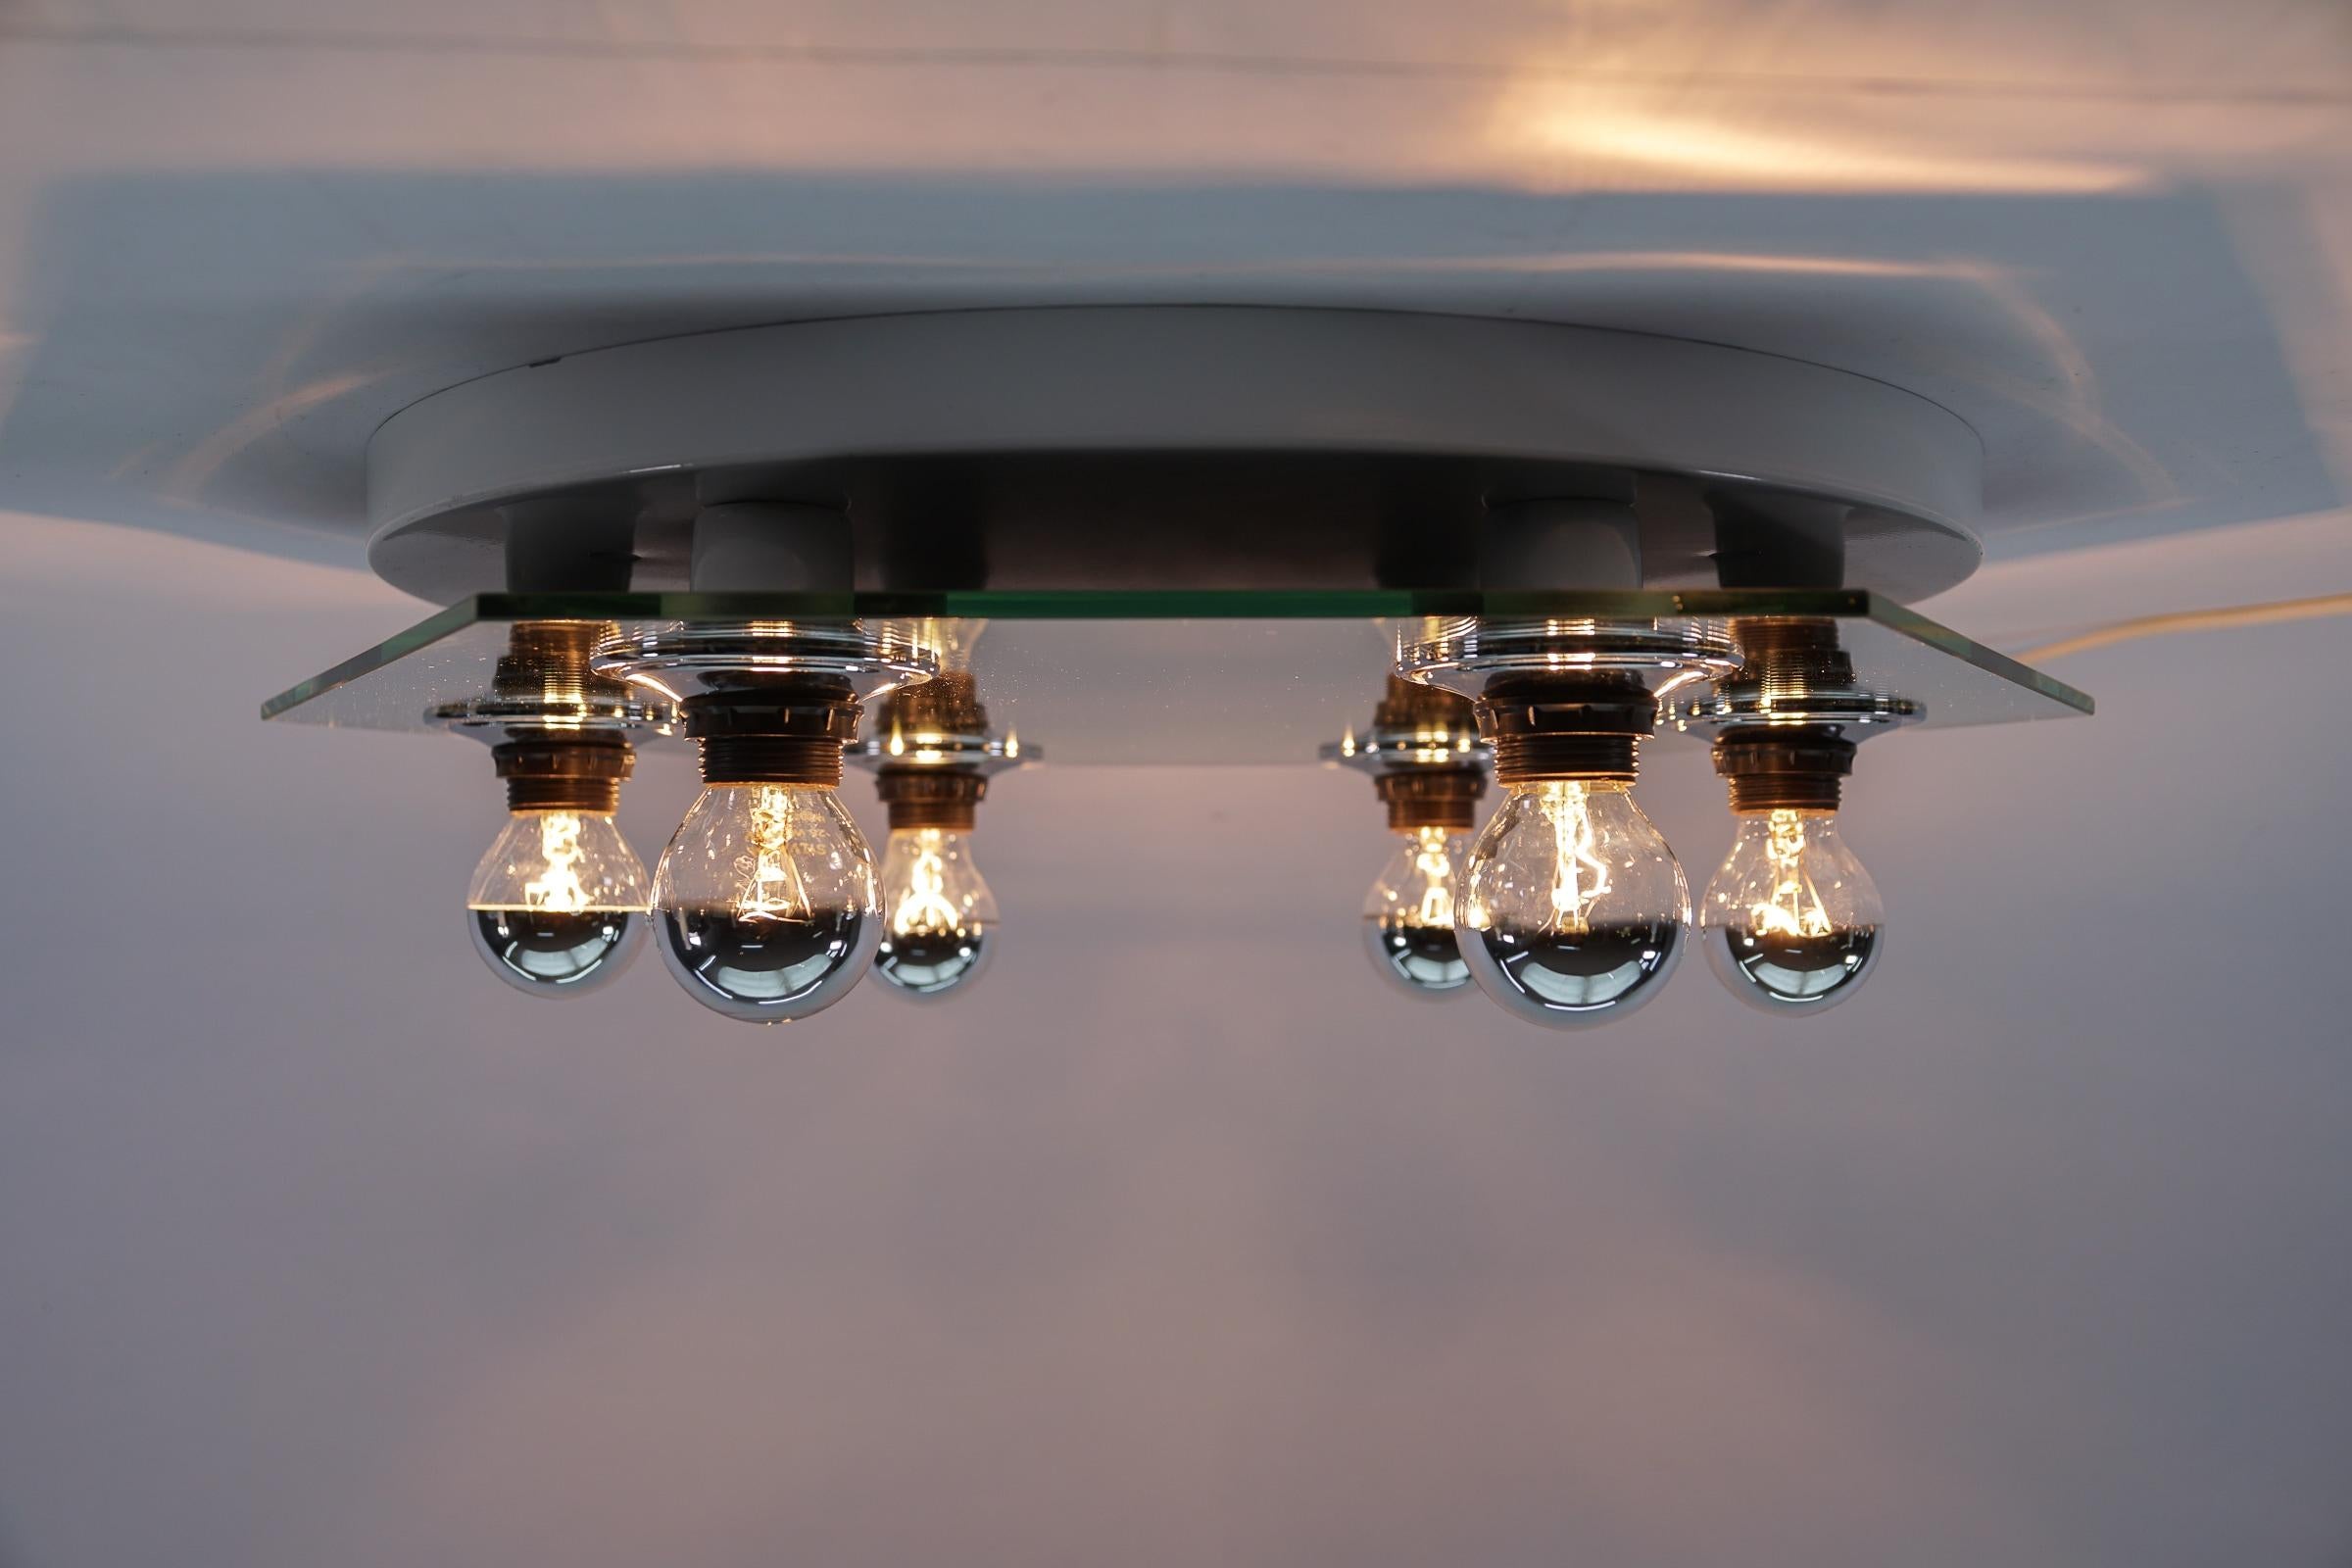 Hexagonal Mirrored Ceiling Lamp With Six Light Bulbs, 1970s Italy For Sale 3